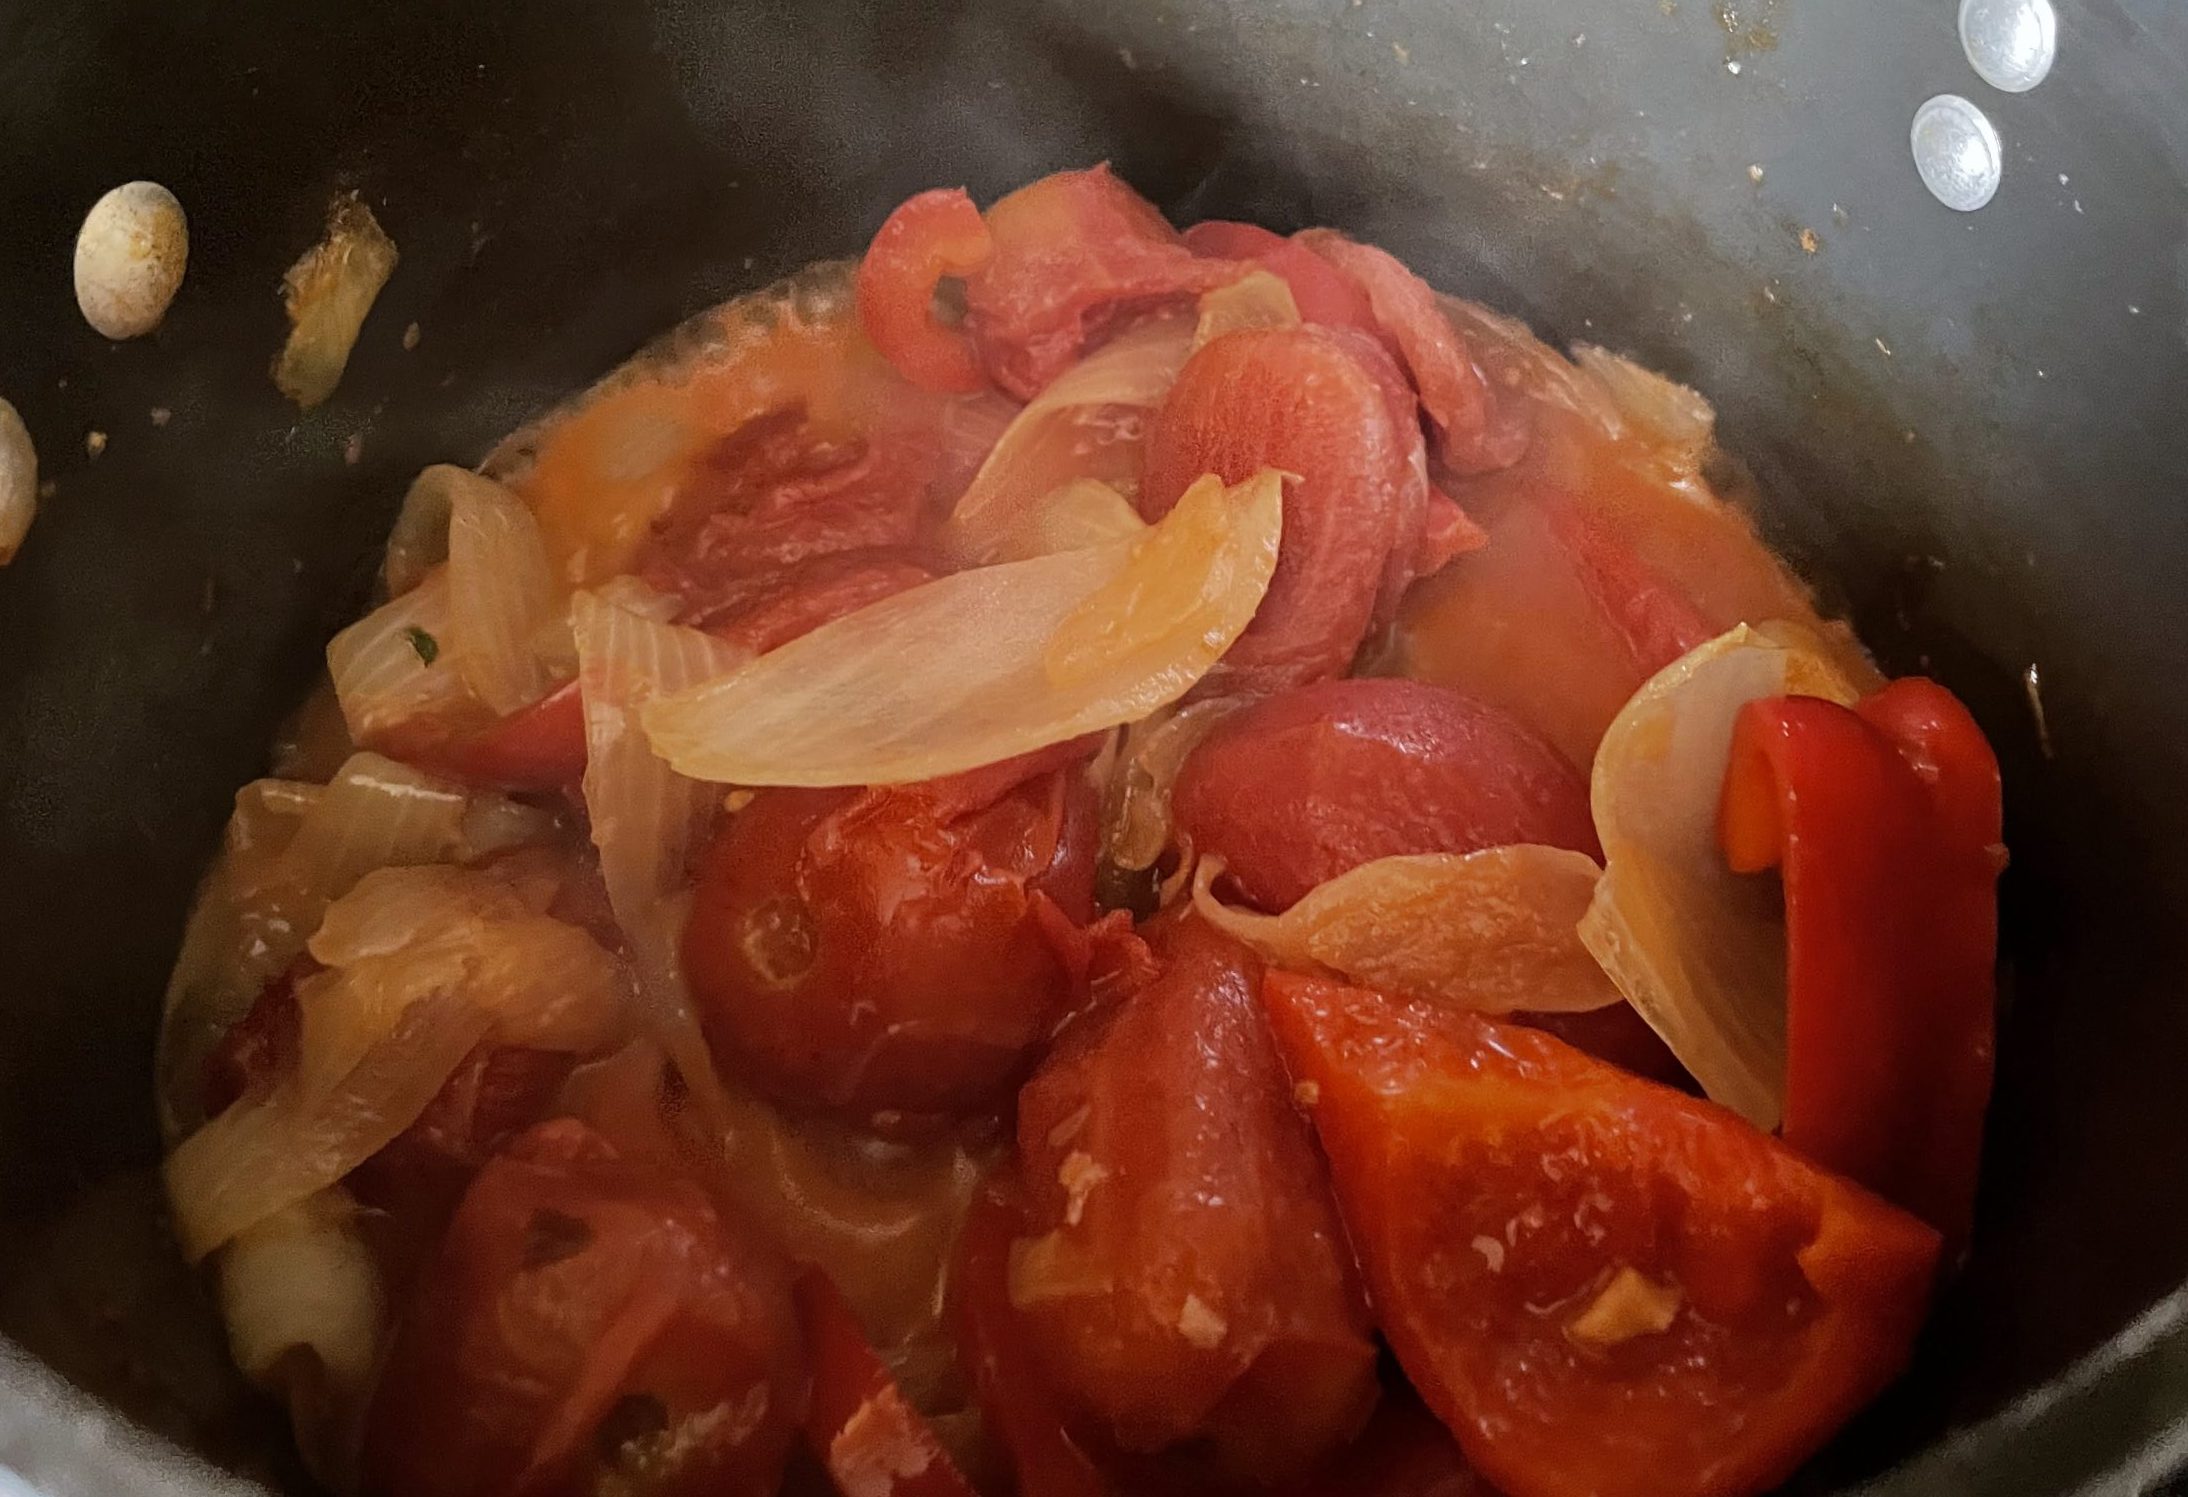 Garlic, onion, pepper and tomatoes sauteed until cooked.